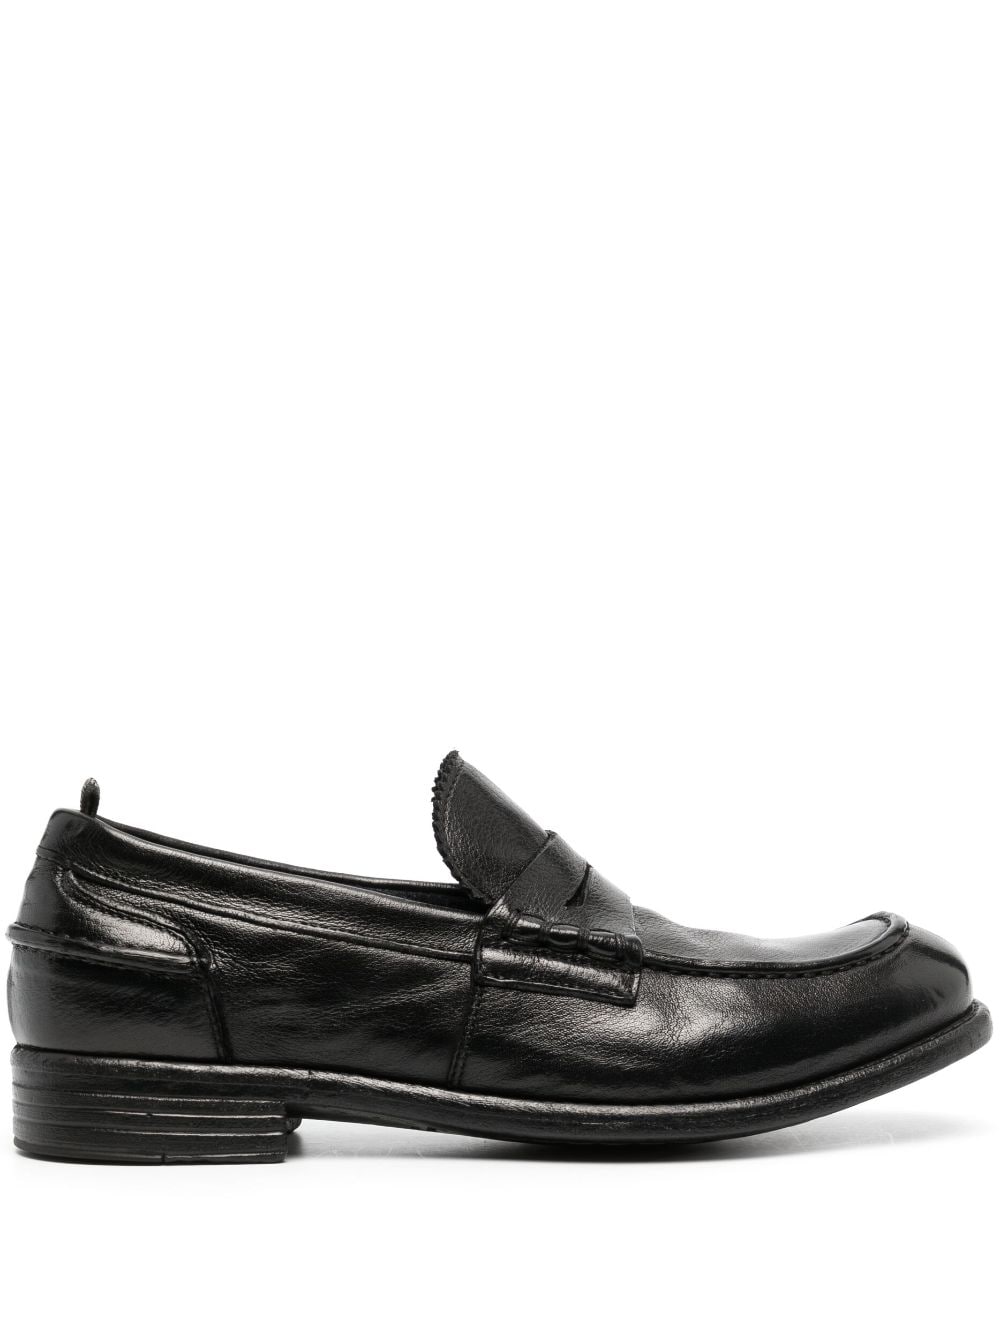 OFFICINE CREATIVE FLAT LEATHER LOAFERS